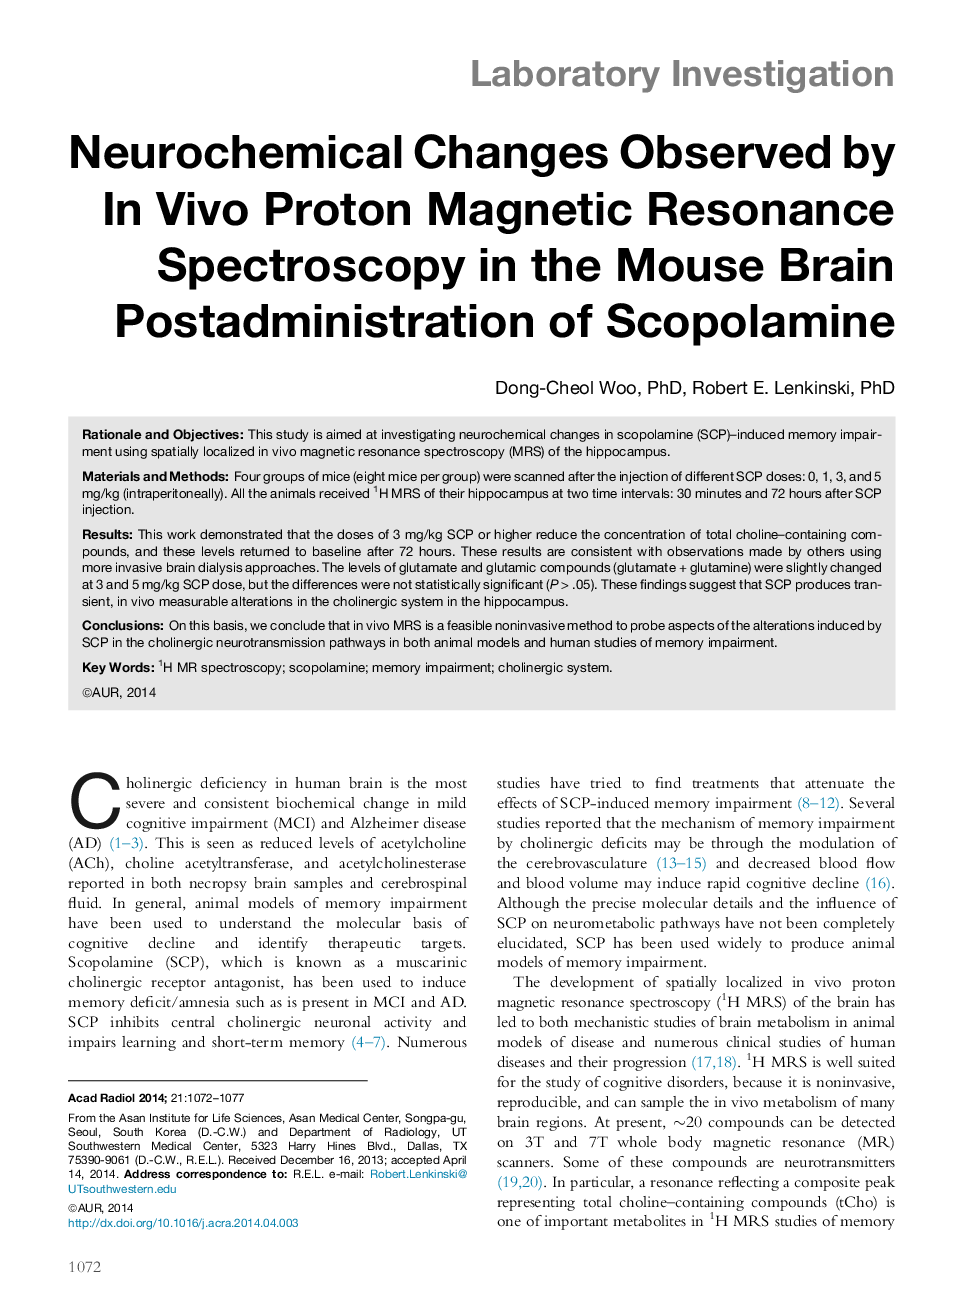 Neurochemical Changes Observed by InÂ Vivo Proton Magnetic Resonance Spectroscopy in the Mouse Brain Postadministration of Scopolamine